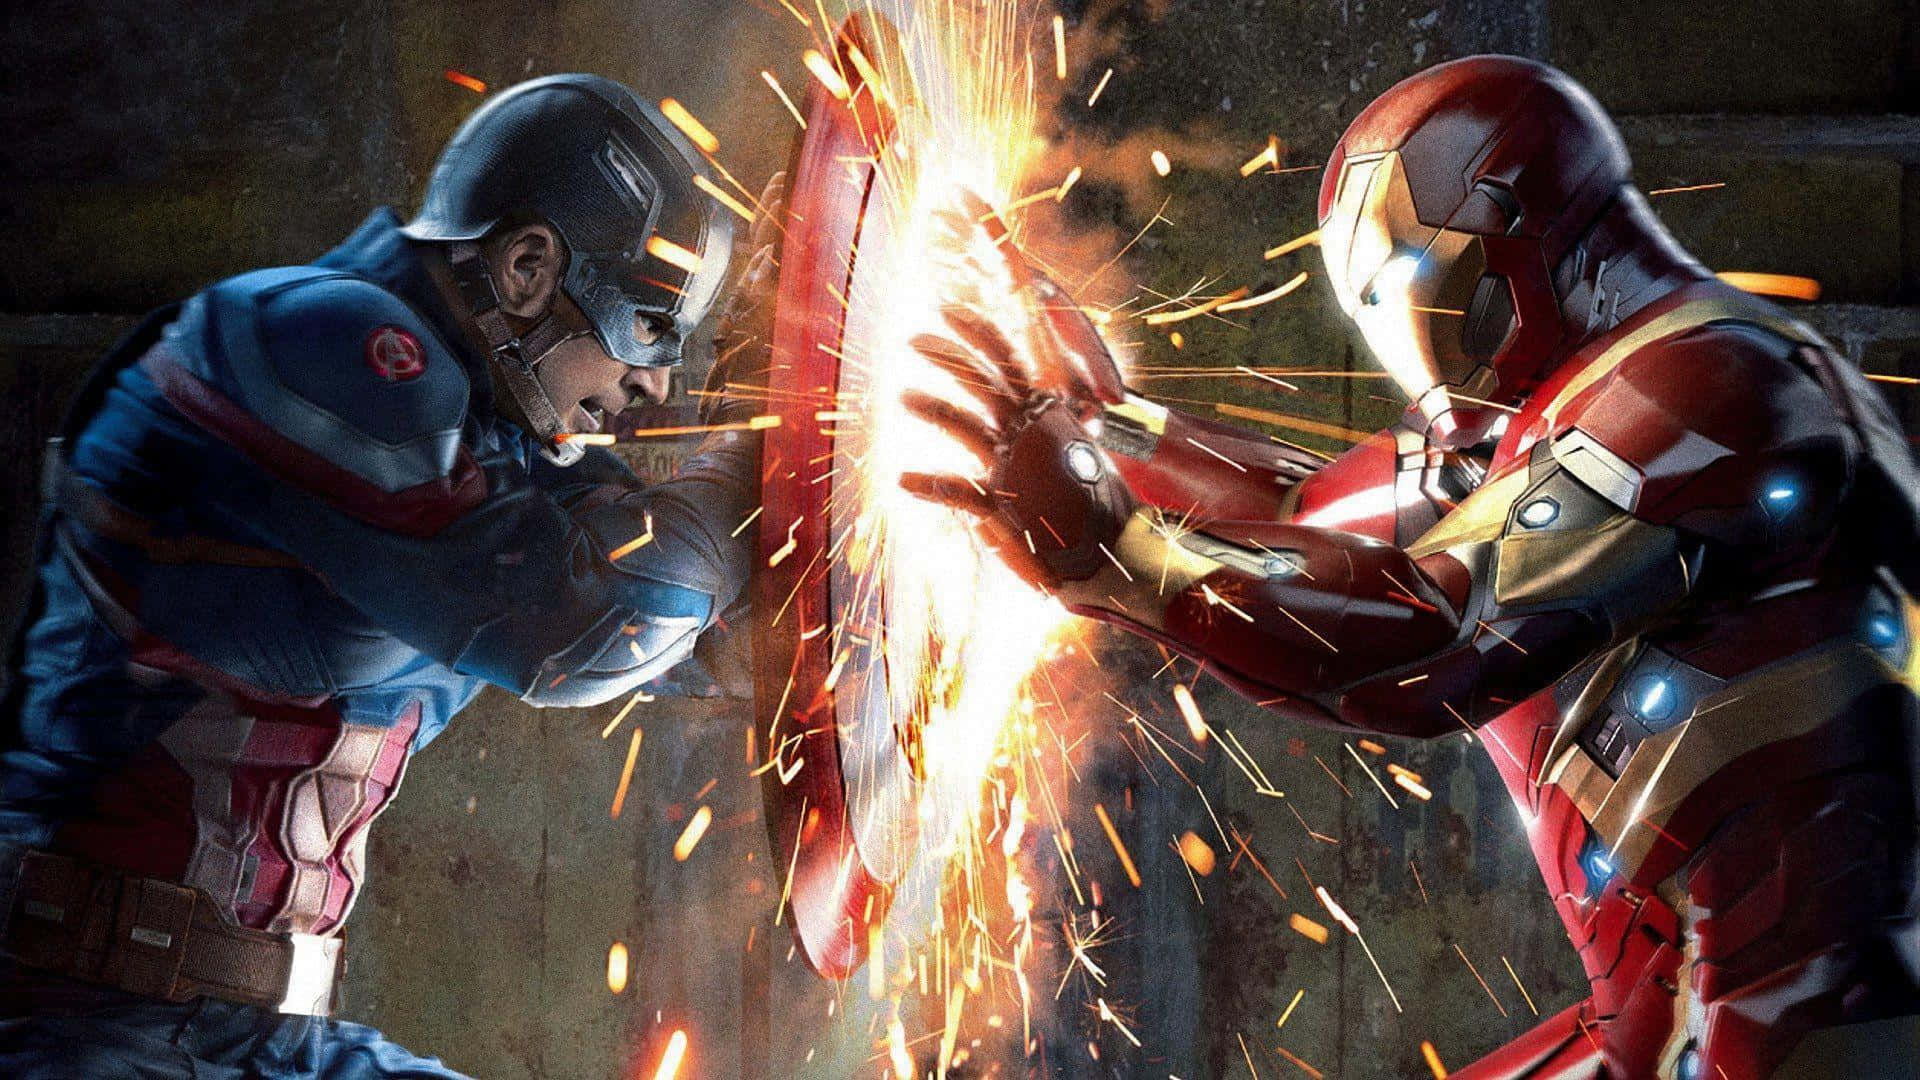 Two of the Marvel Universe's mightiest heroes pitted in a timeless battle. Wallpaper